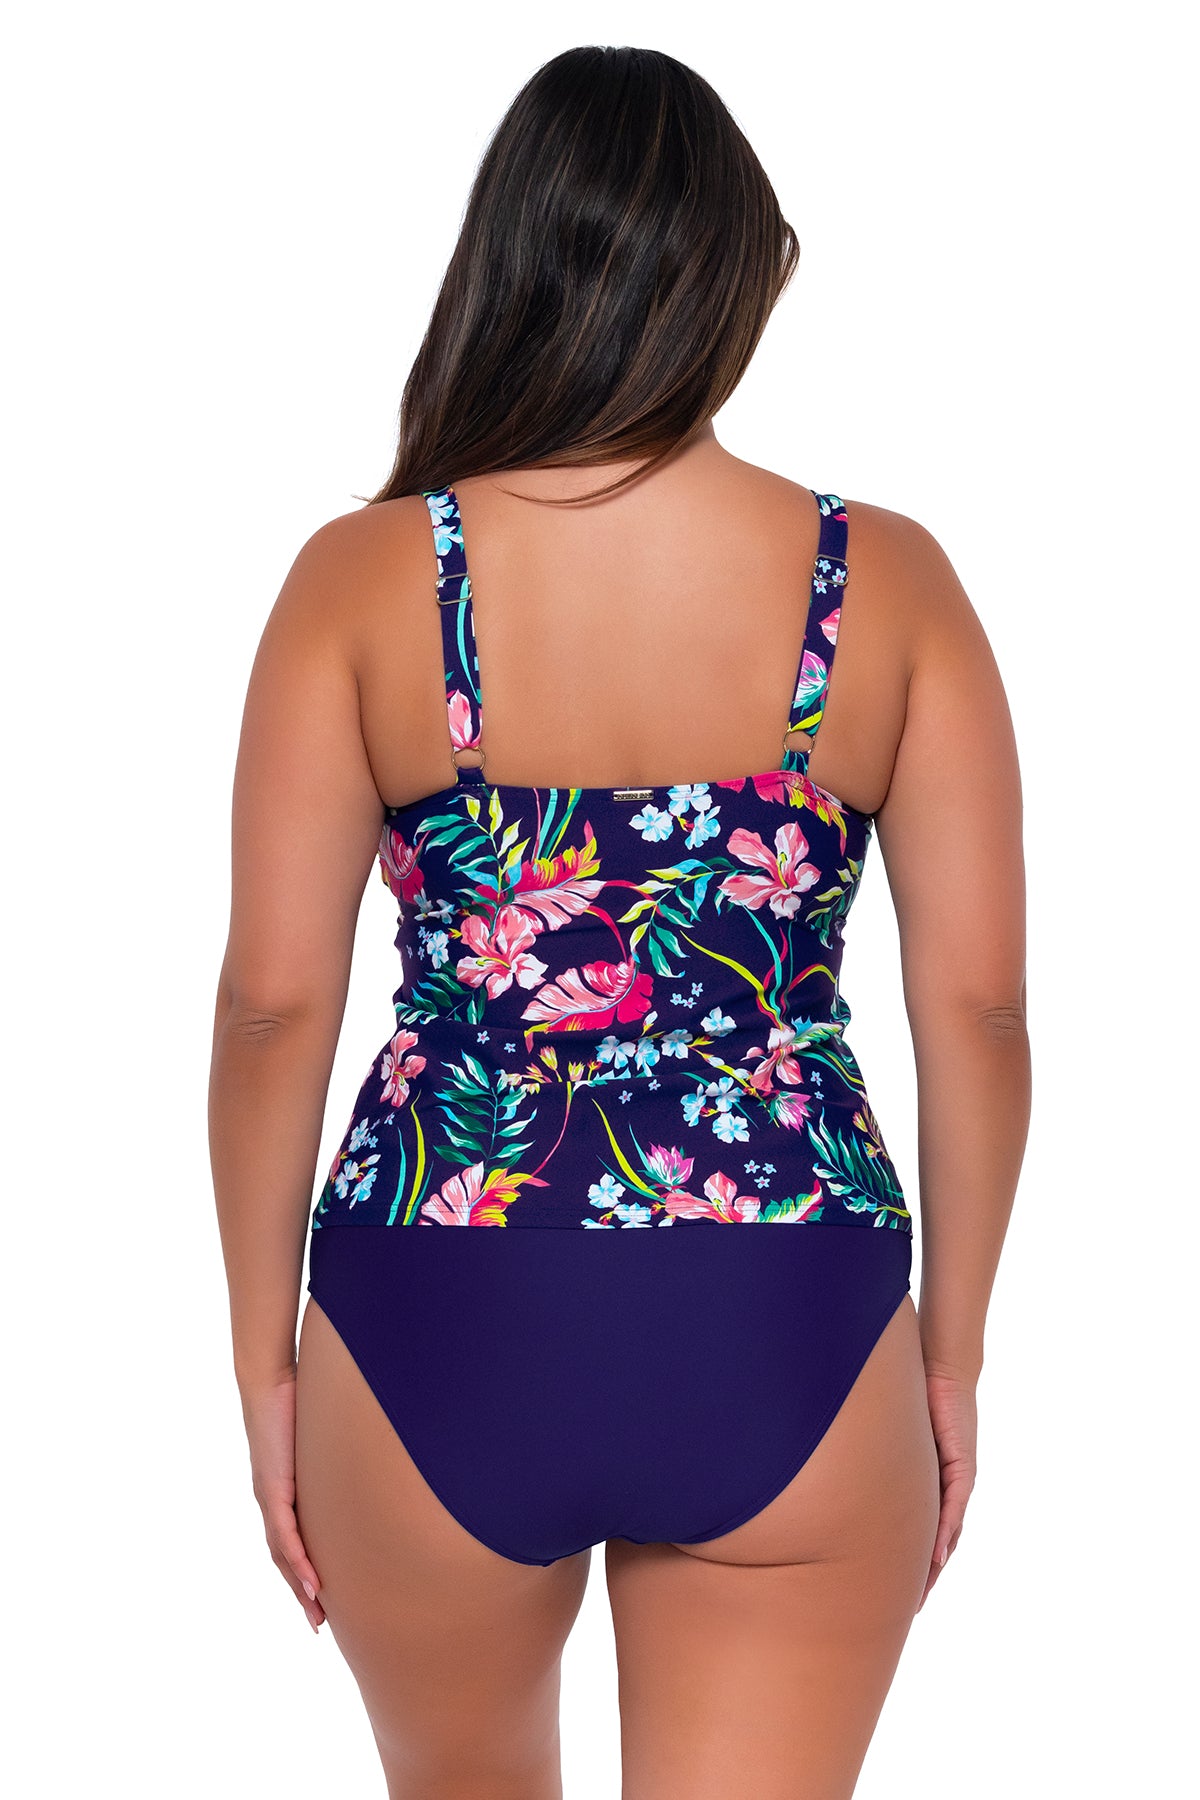 Sunsets Island Getaway Forever Tankini Top